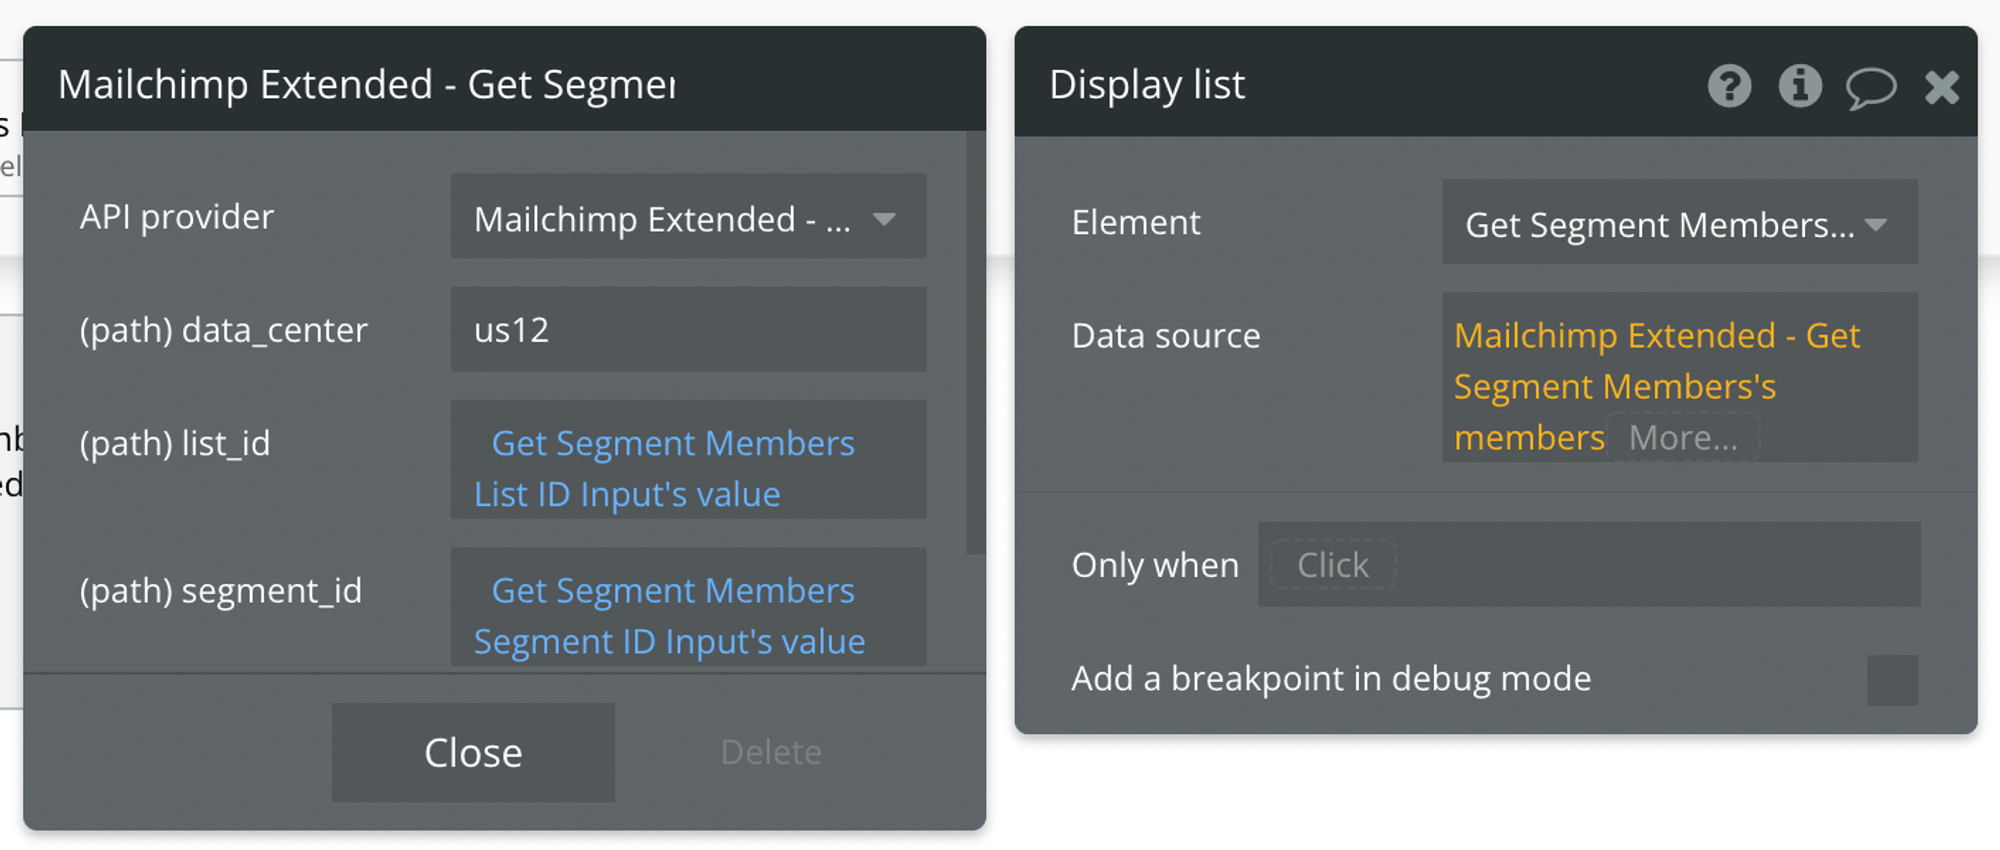 Select Mailchimp Extended - Get Segment Members's members for the data source